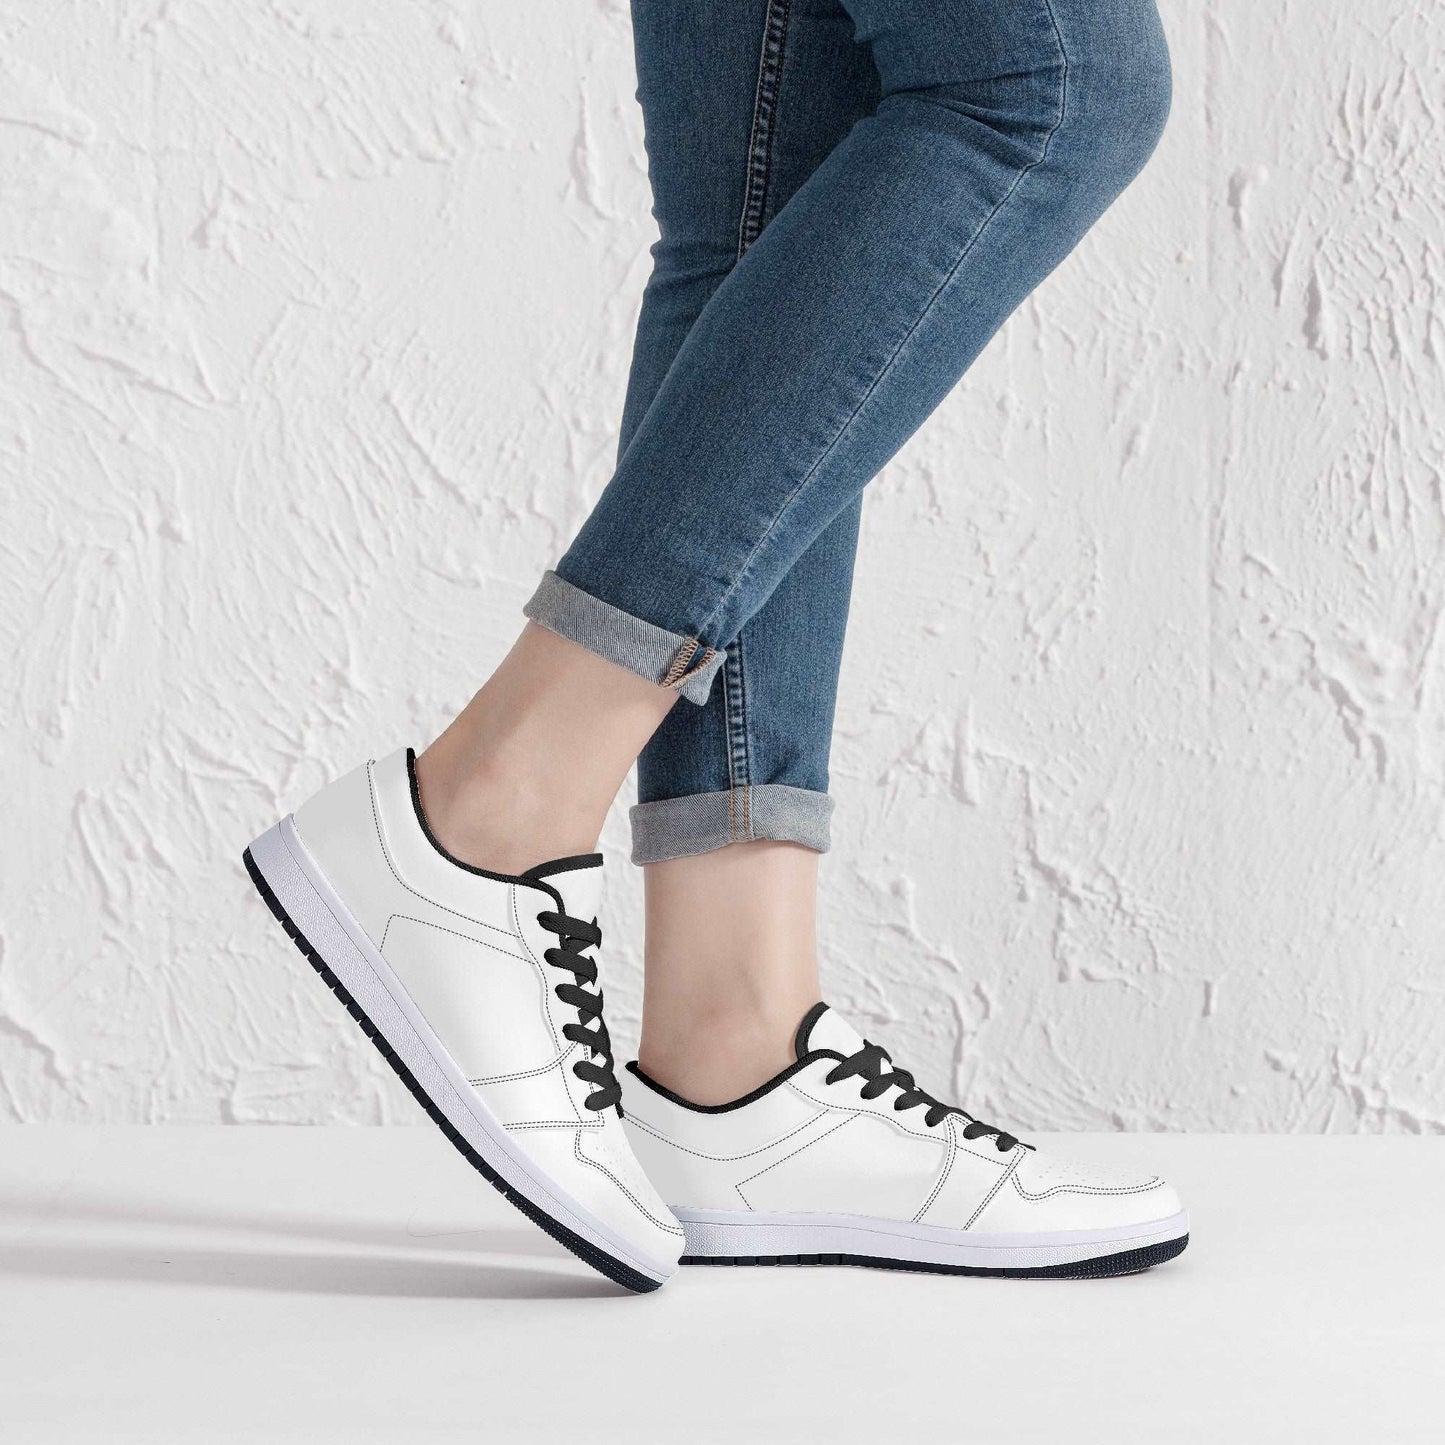 Create Your Own - Low Top Synthetic Leather Sneakers - Black - HayGoodies